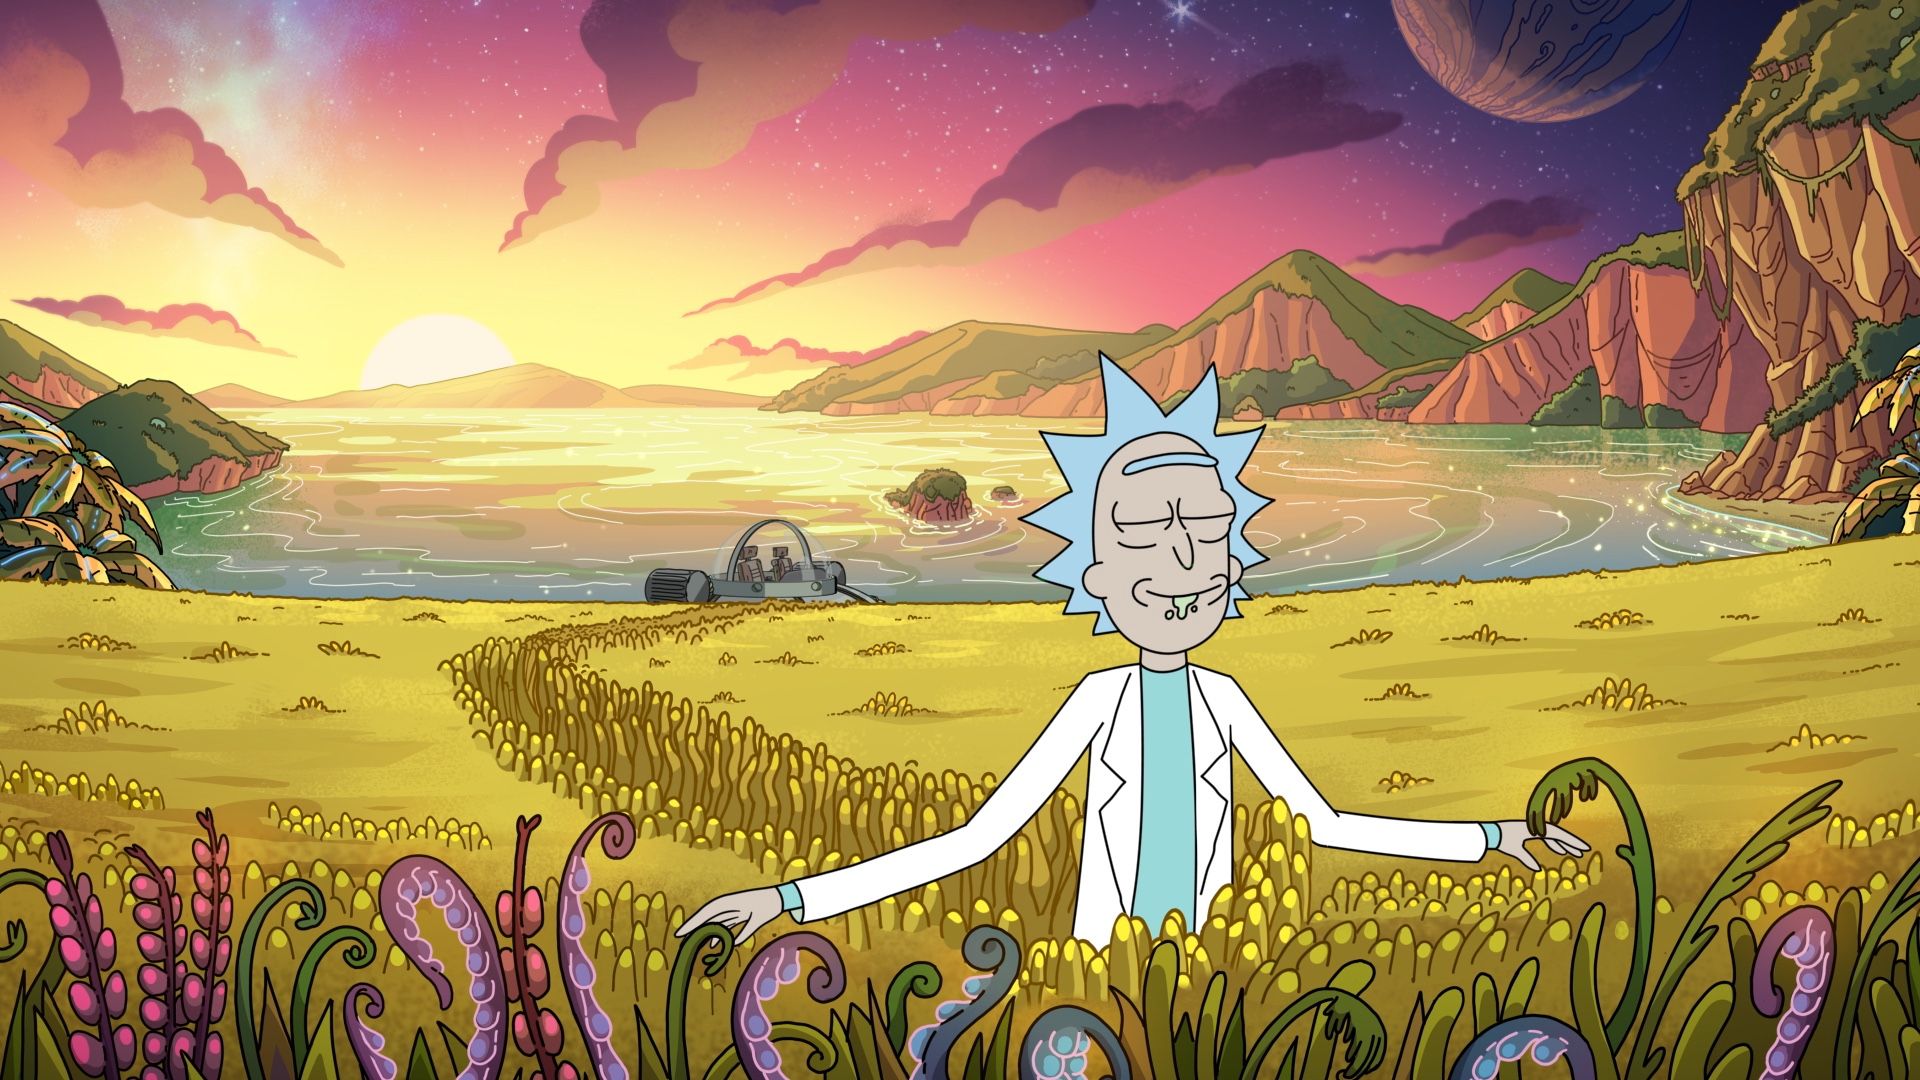 Download Rick And Morty Breaking Bad Wallpapers Wallpaper